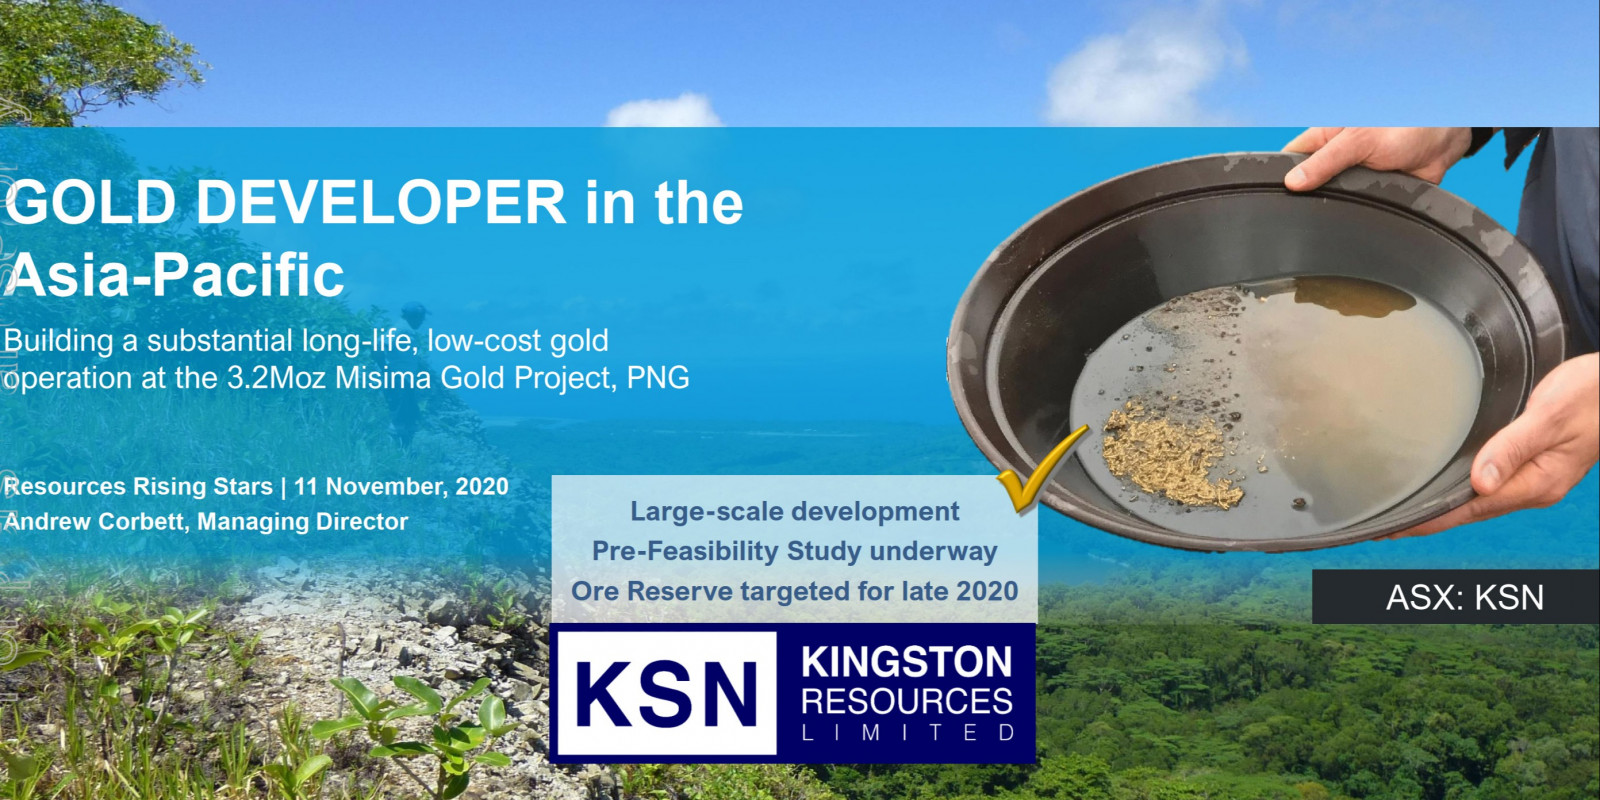 Kingston Resources Ltd - Building a substantial long-life, low-cost gold operation at the 3.2Moz Misima Gold Project, PNG